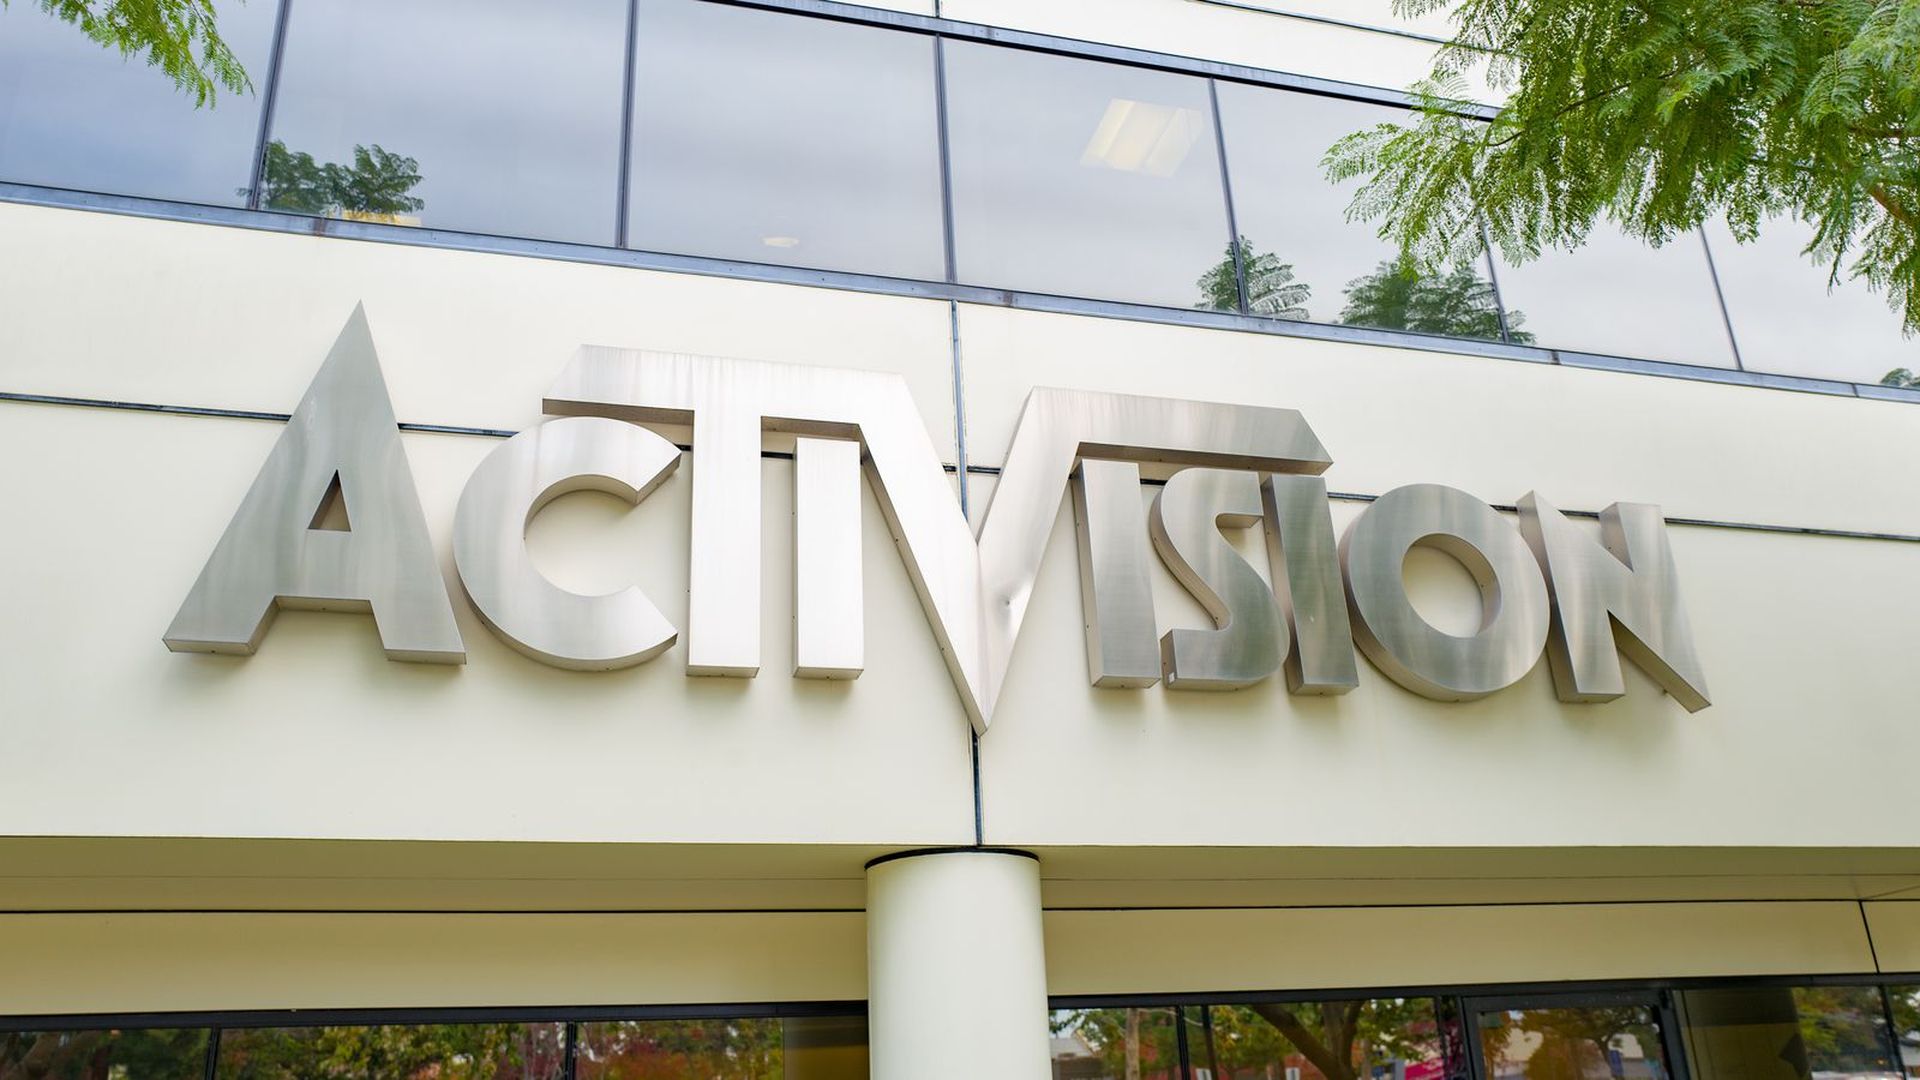 The Activision logo on a company building